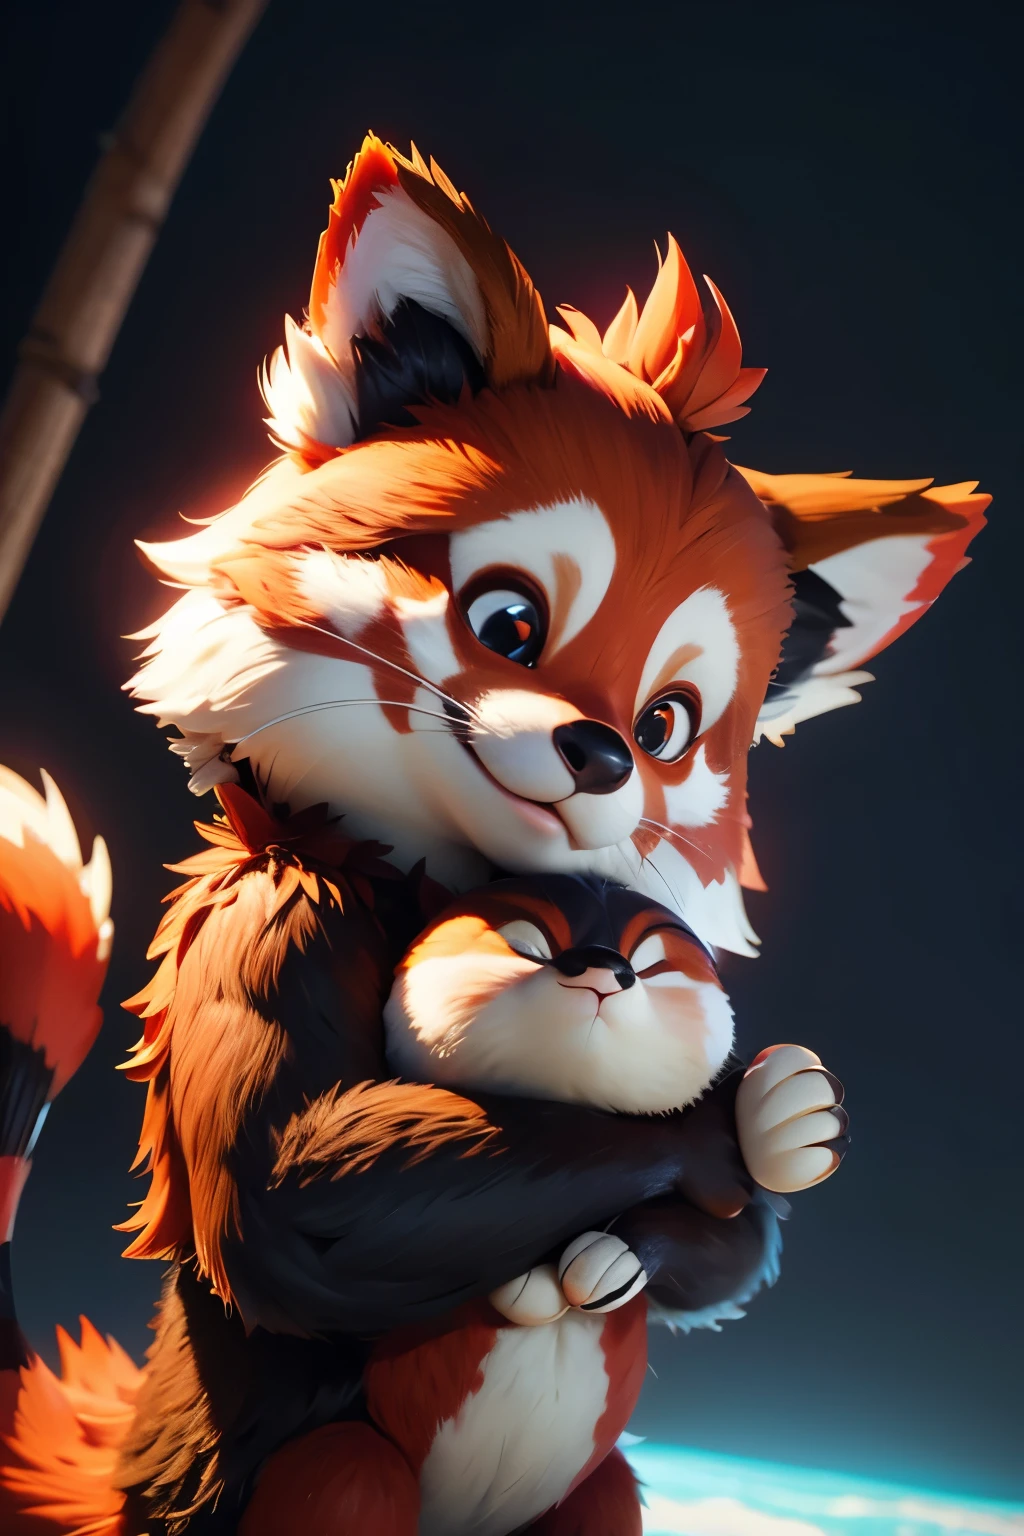 Make a very beautiful picture of Red Panda, it should be 3D, very cute, touching, ultra-realistic in the spirit of Rocket Raccoon